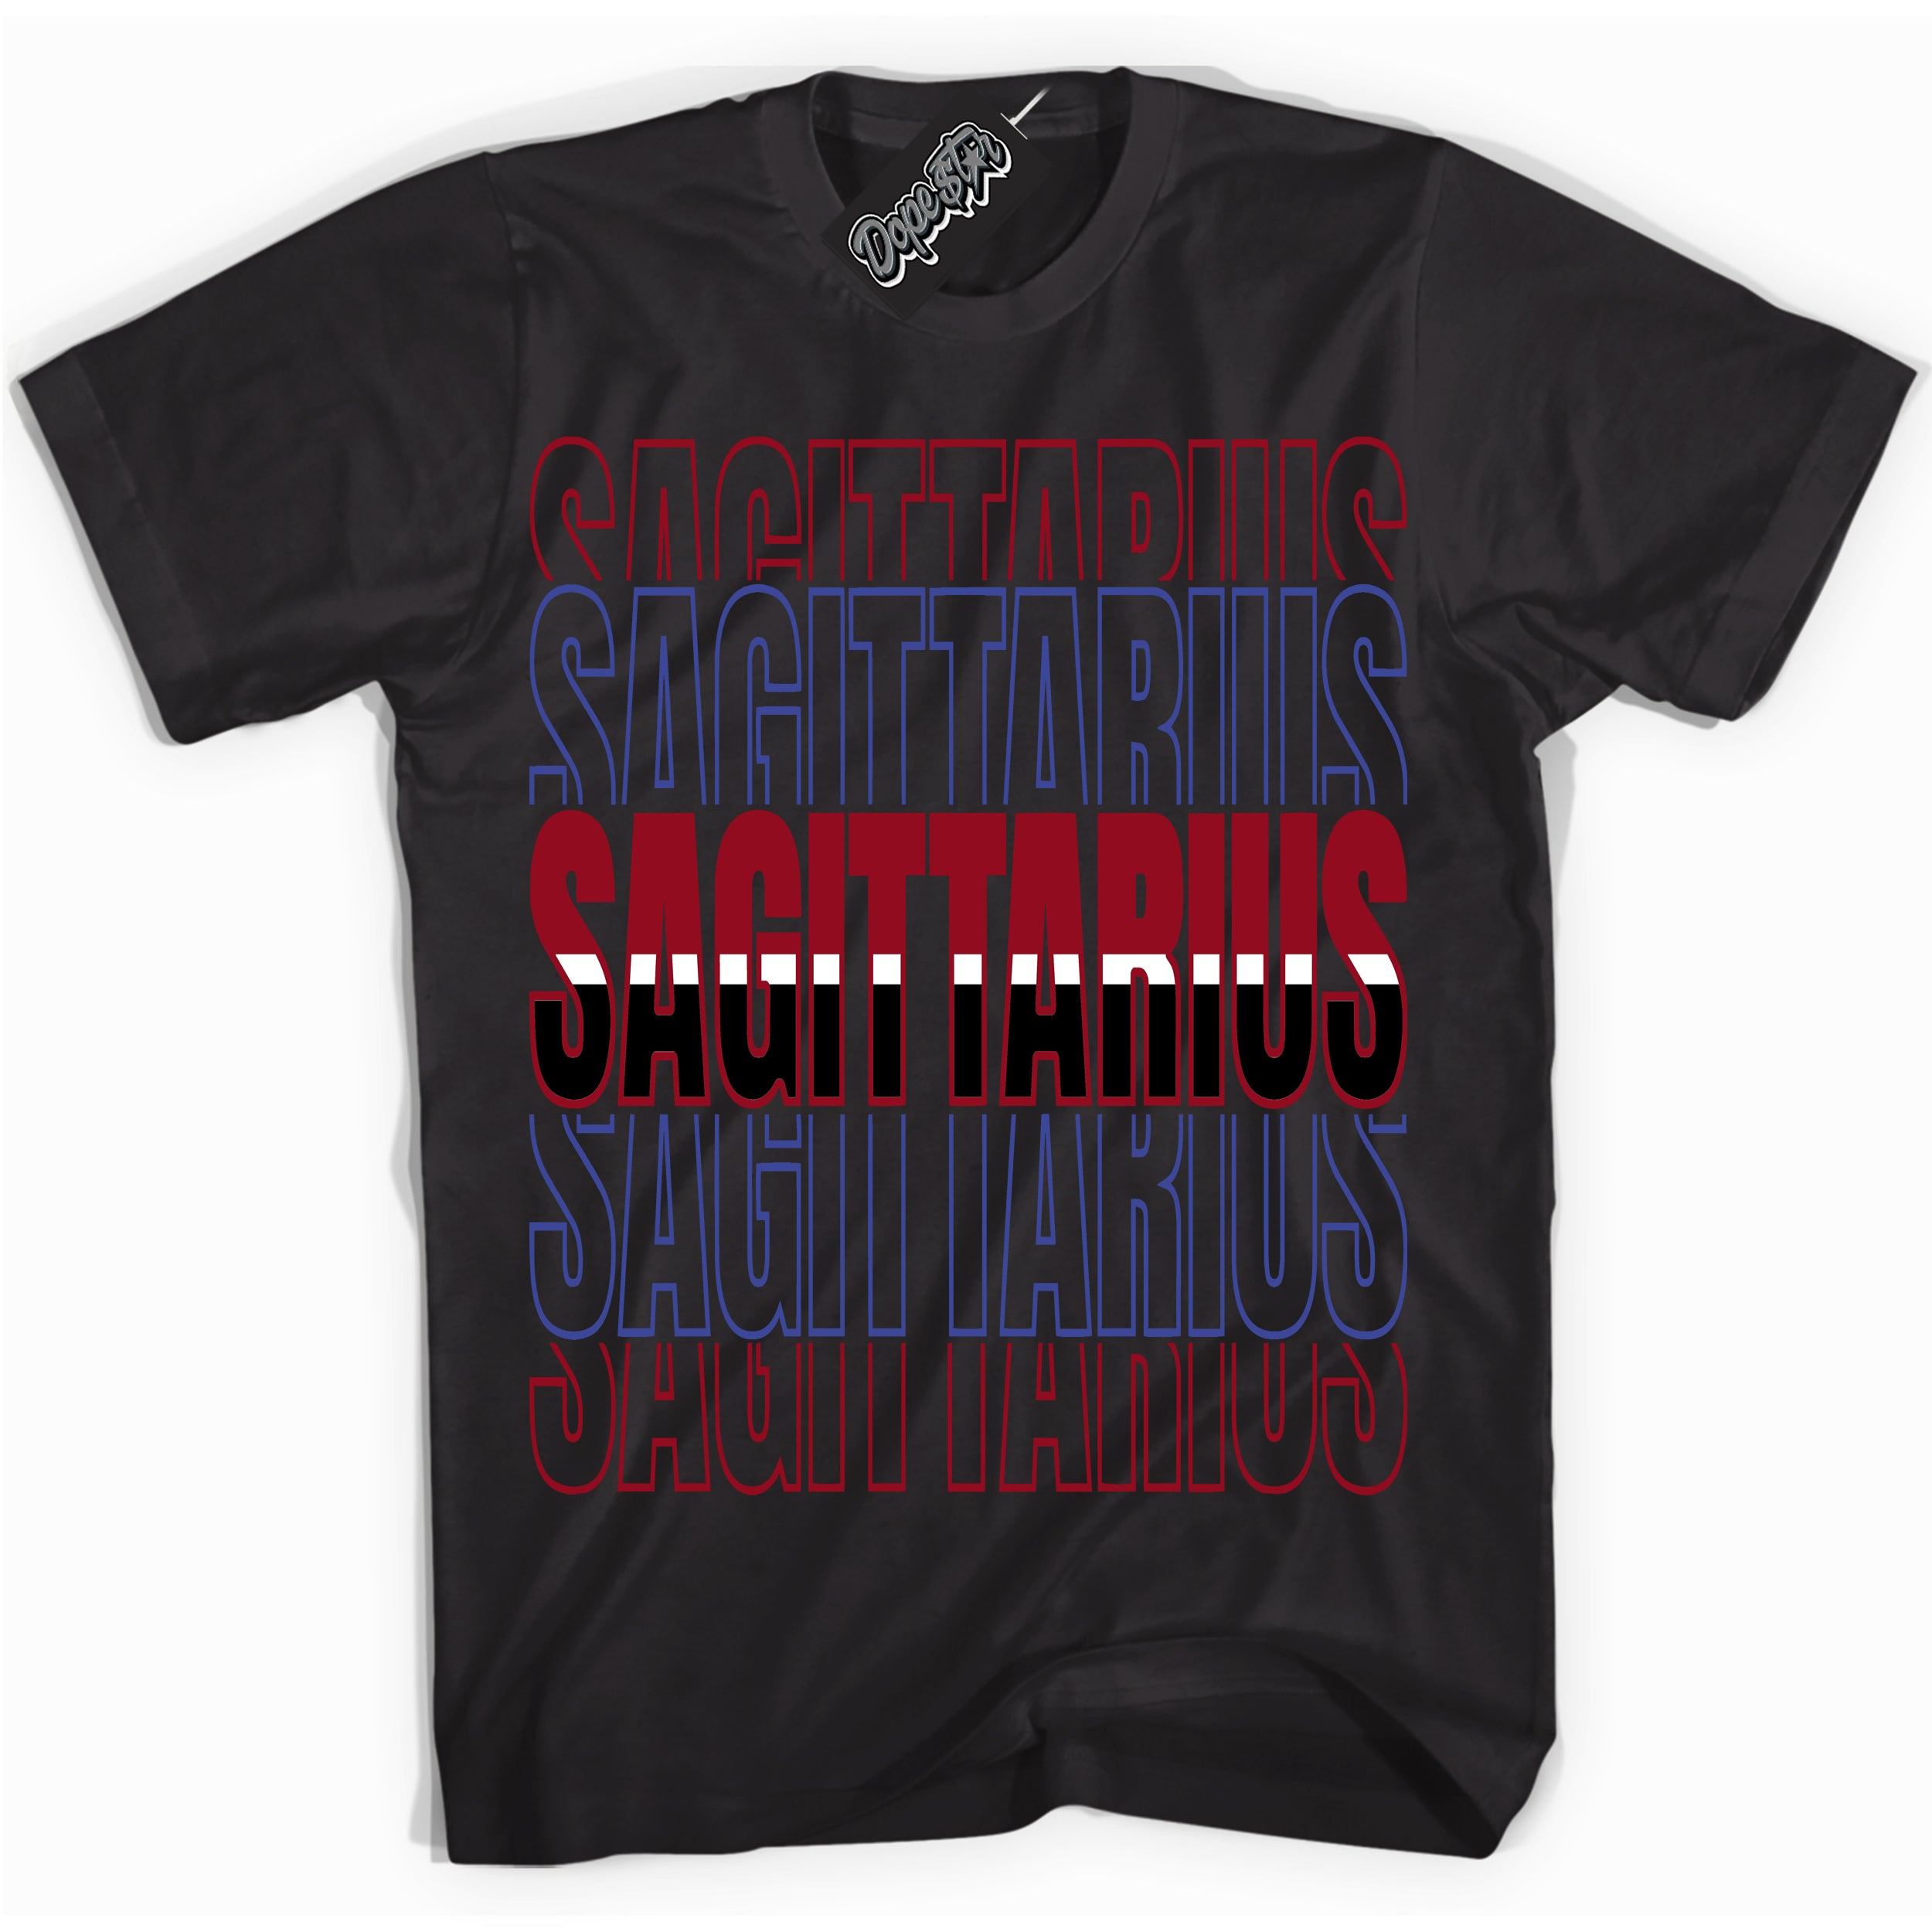 Cool Black Shirt with “ Sagittarius ” design that perfectly matches Playoffs 8s Sneakers.